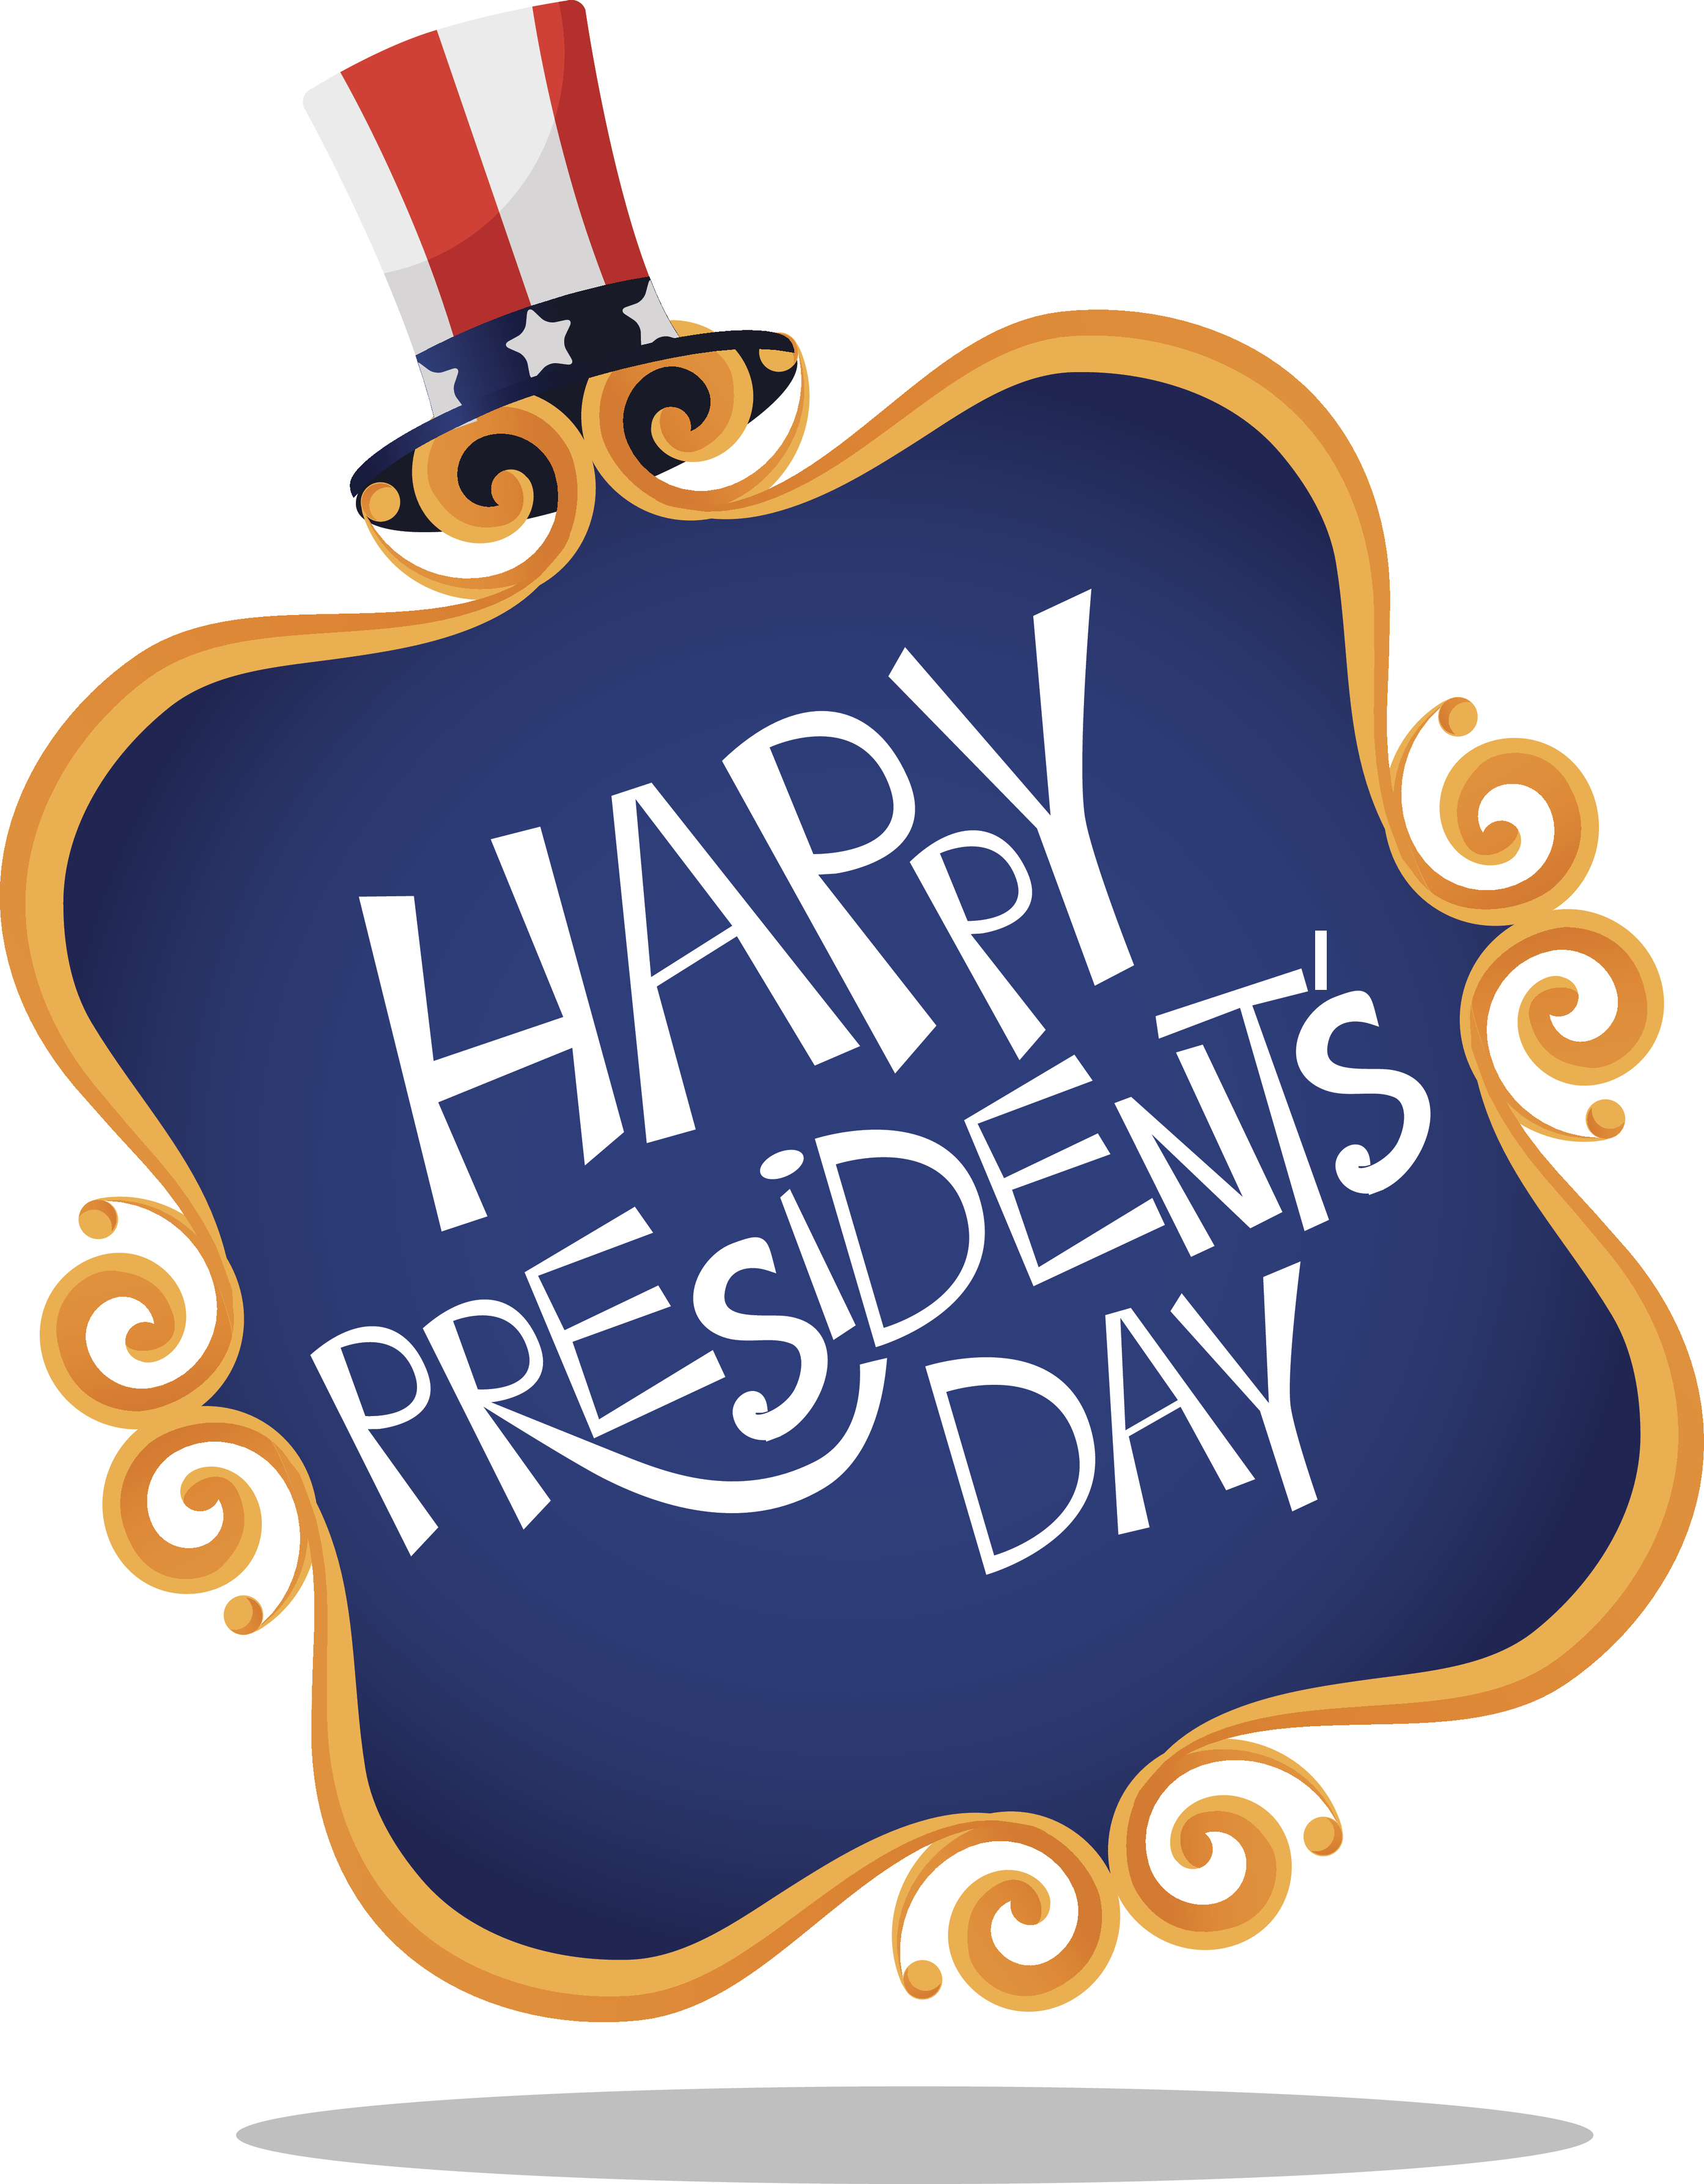 President's Day Office and Pharmacy Closings